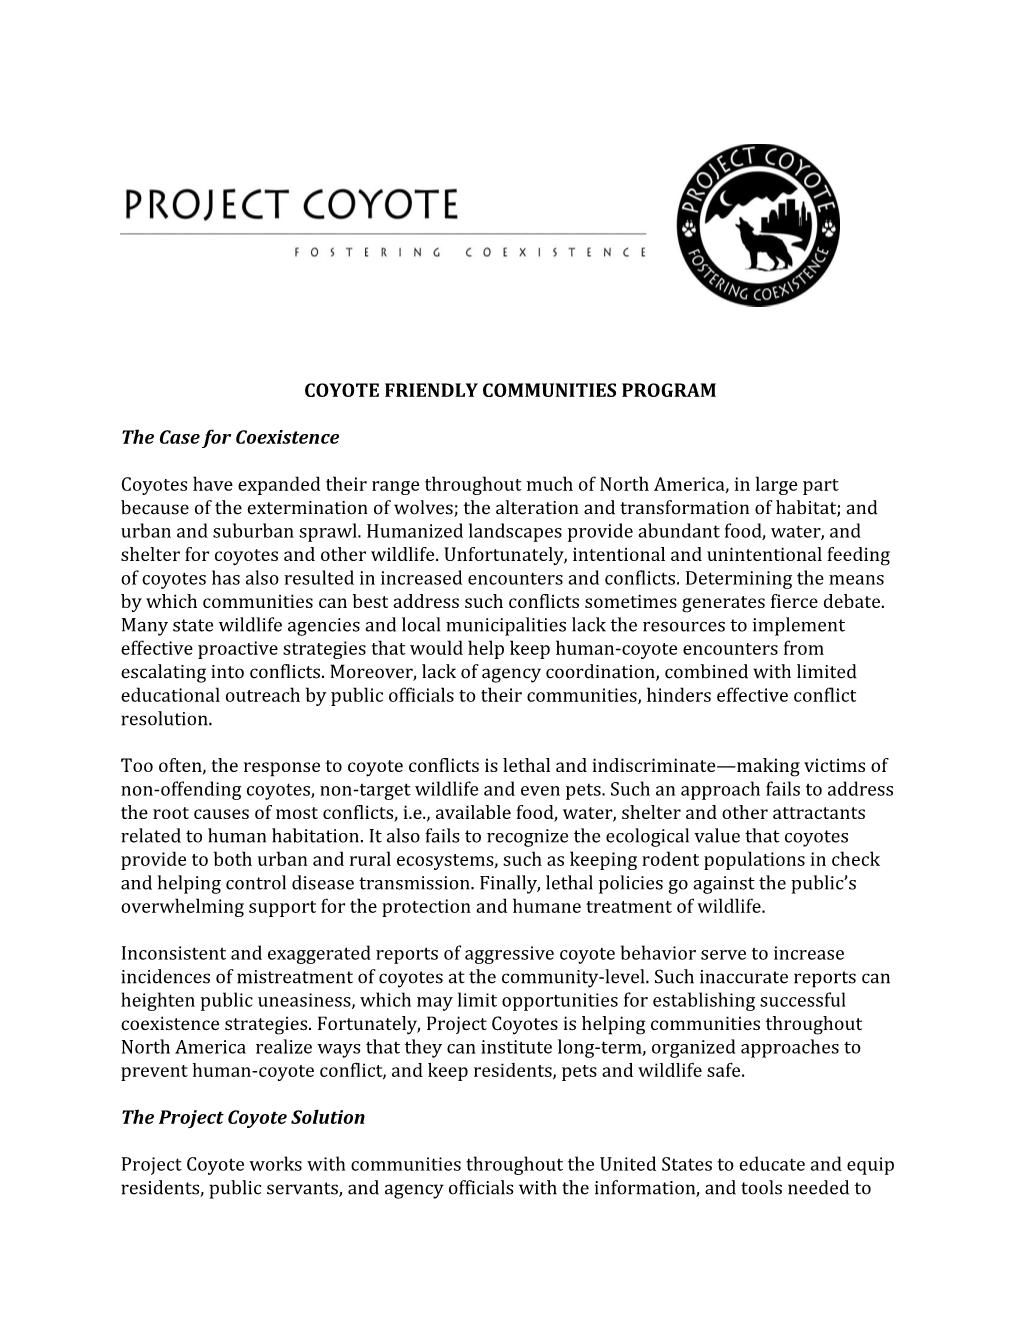 COYOTE FRIENDLY COMMUNITIES PROGRAM the Case For